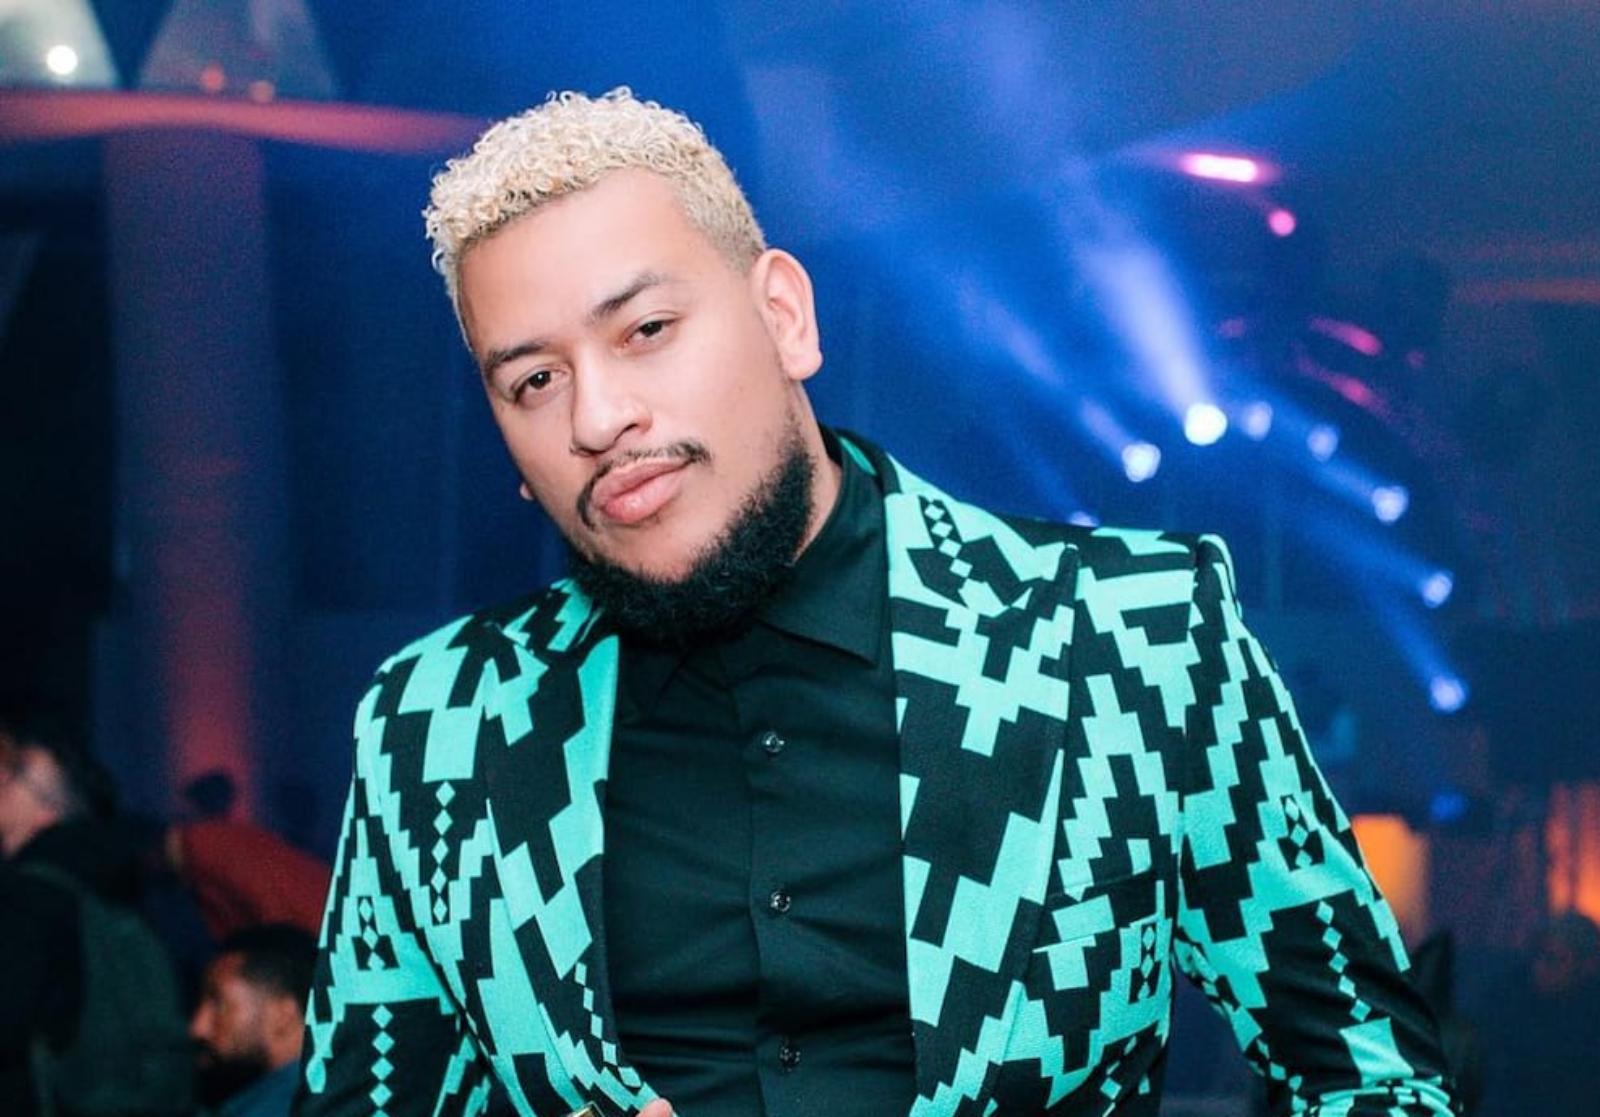 Three suspects arrested over South African rapper’s death